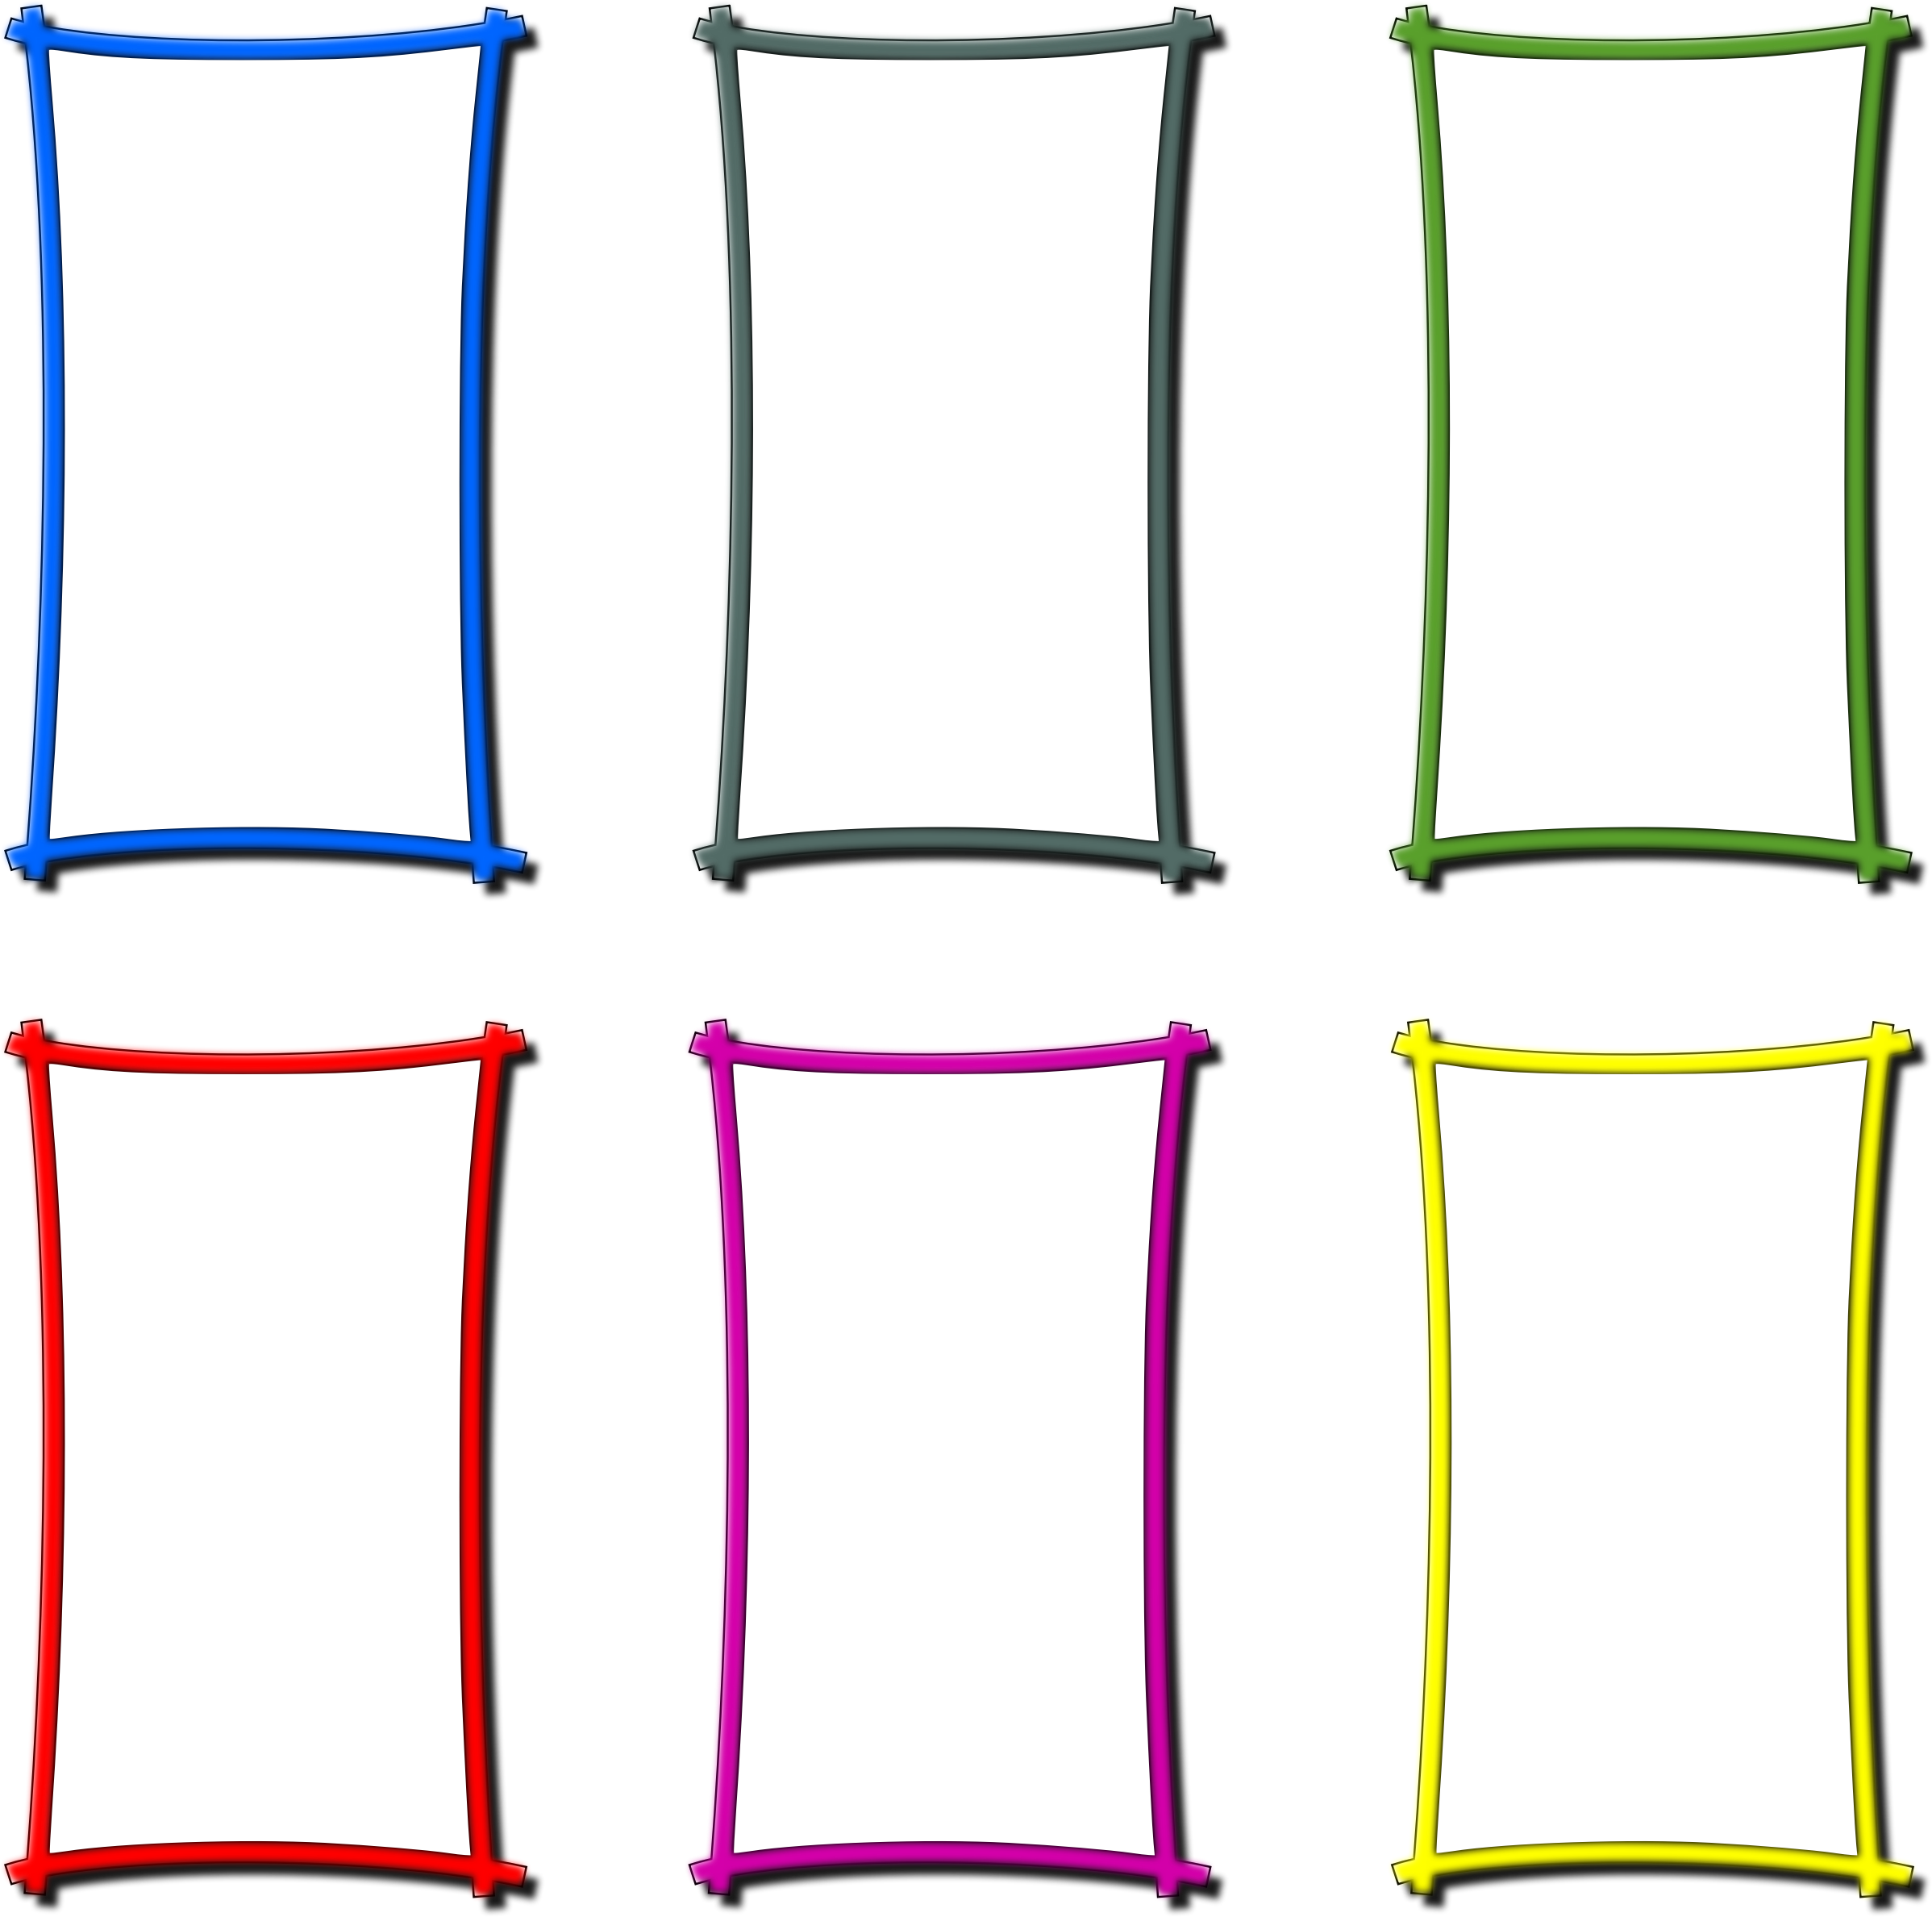 A Group Of Rectangular Colored Rectangles